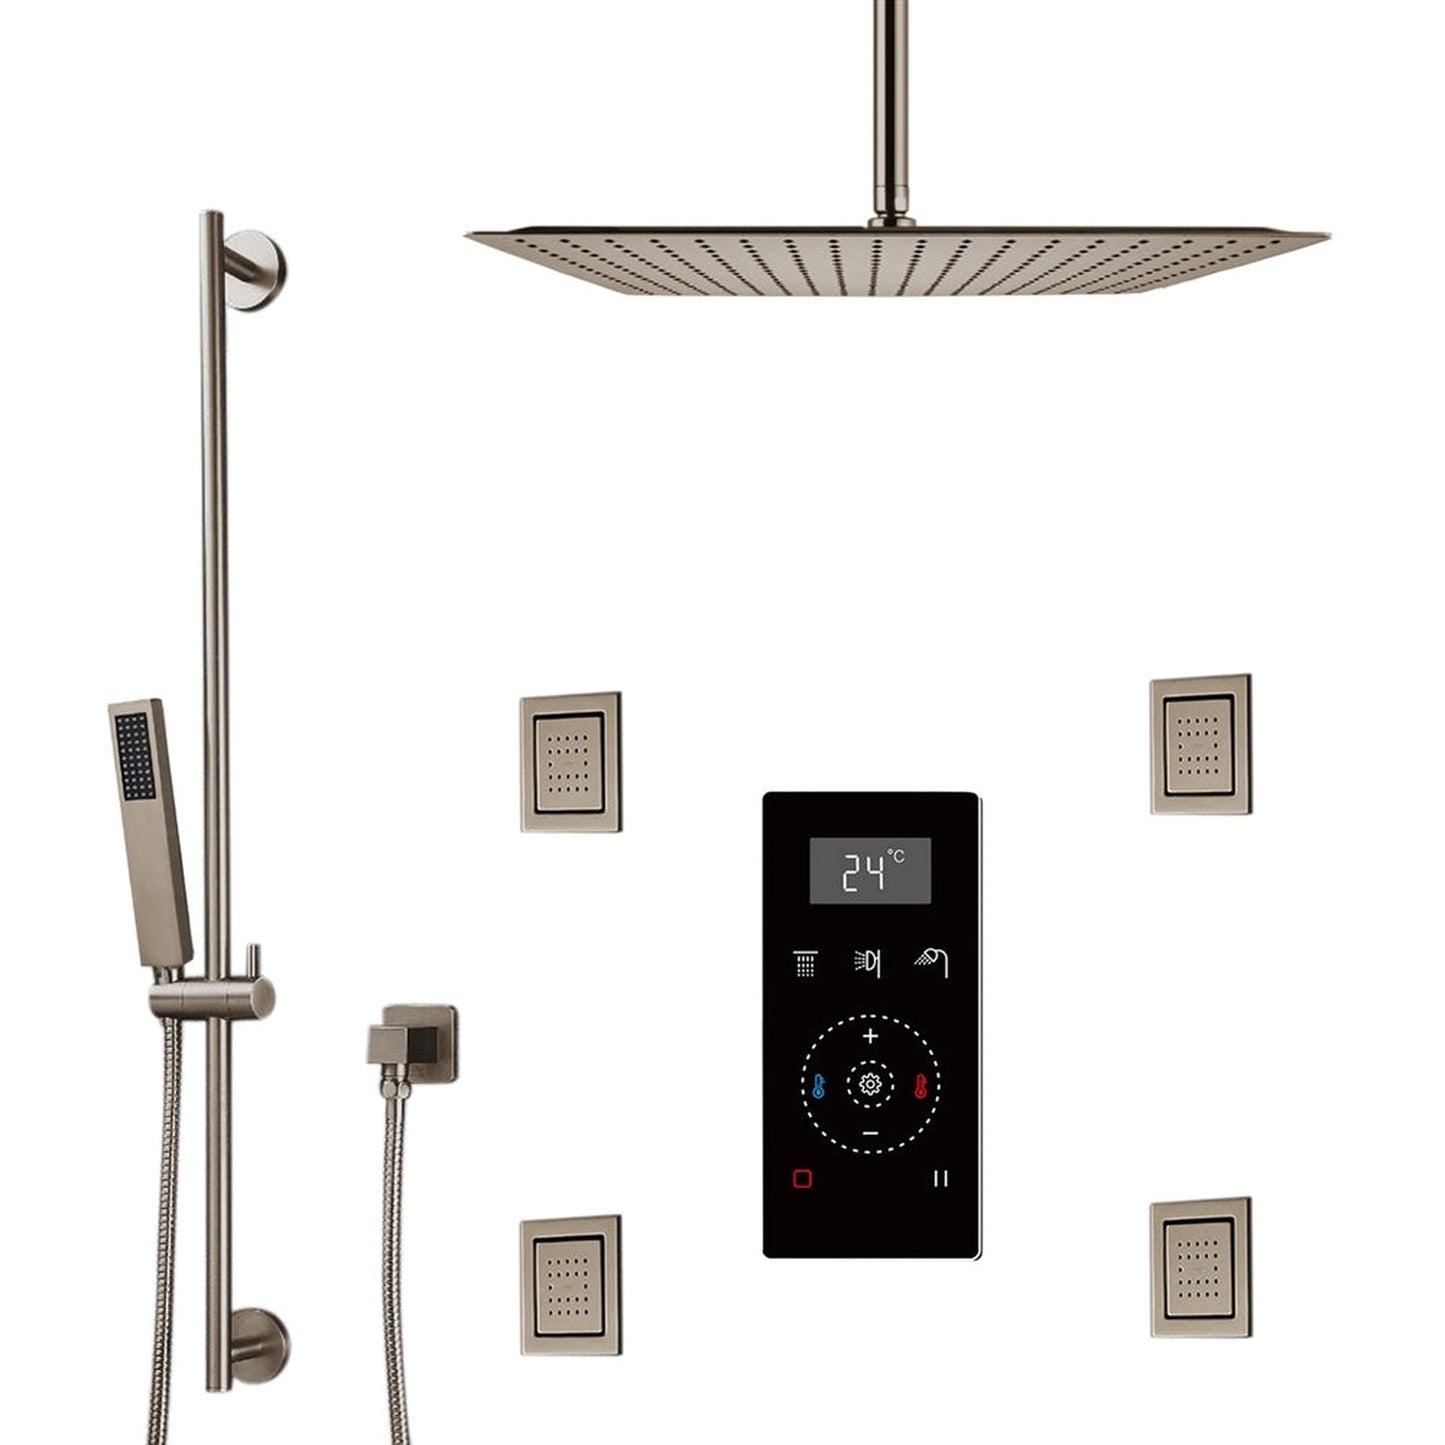 Fontana 12" Brushed Nickel Ceiling Mounted Rainfall Digital Control Shower System With 4-Jet Body Sprays, Hand Shower and Without Water Powered LED Lights